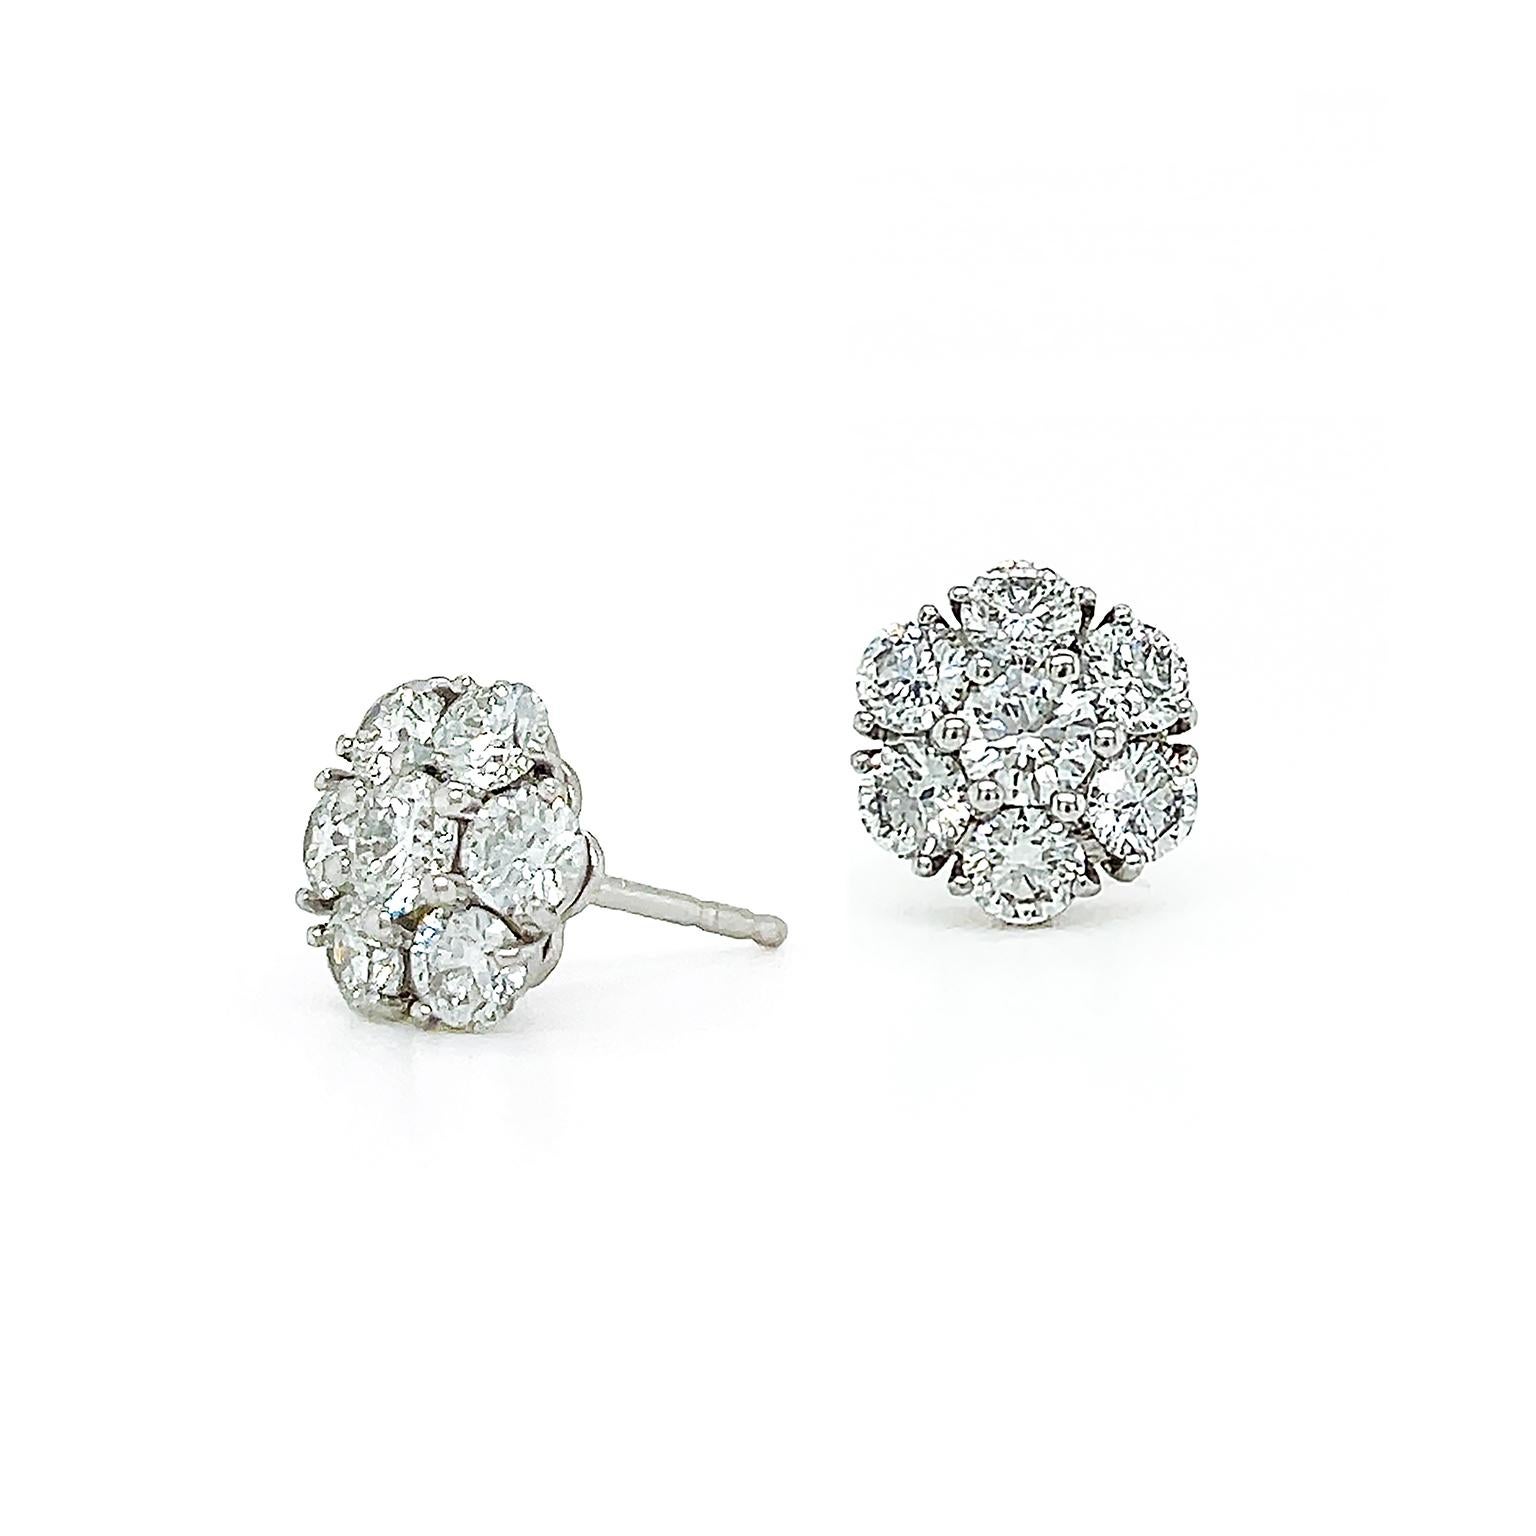 The radiance of brilliant cut diamonds is illustrated in these earrings. A single diamond in the center is surrounded by six diamonds, all set in platinum for a cohesive look to allow the gem to glisten. Attached by European back post and clutch,